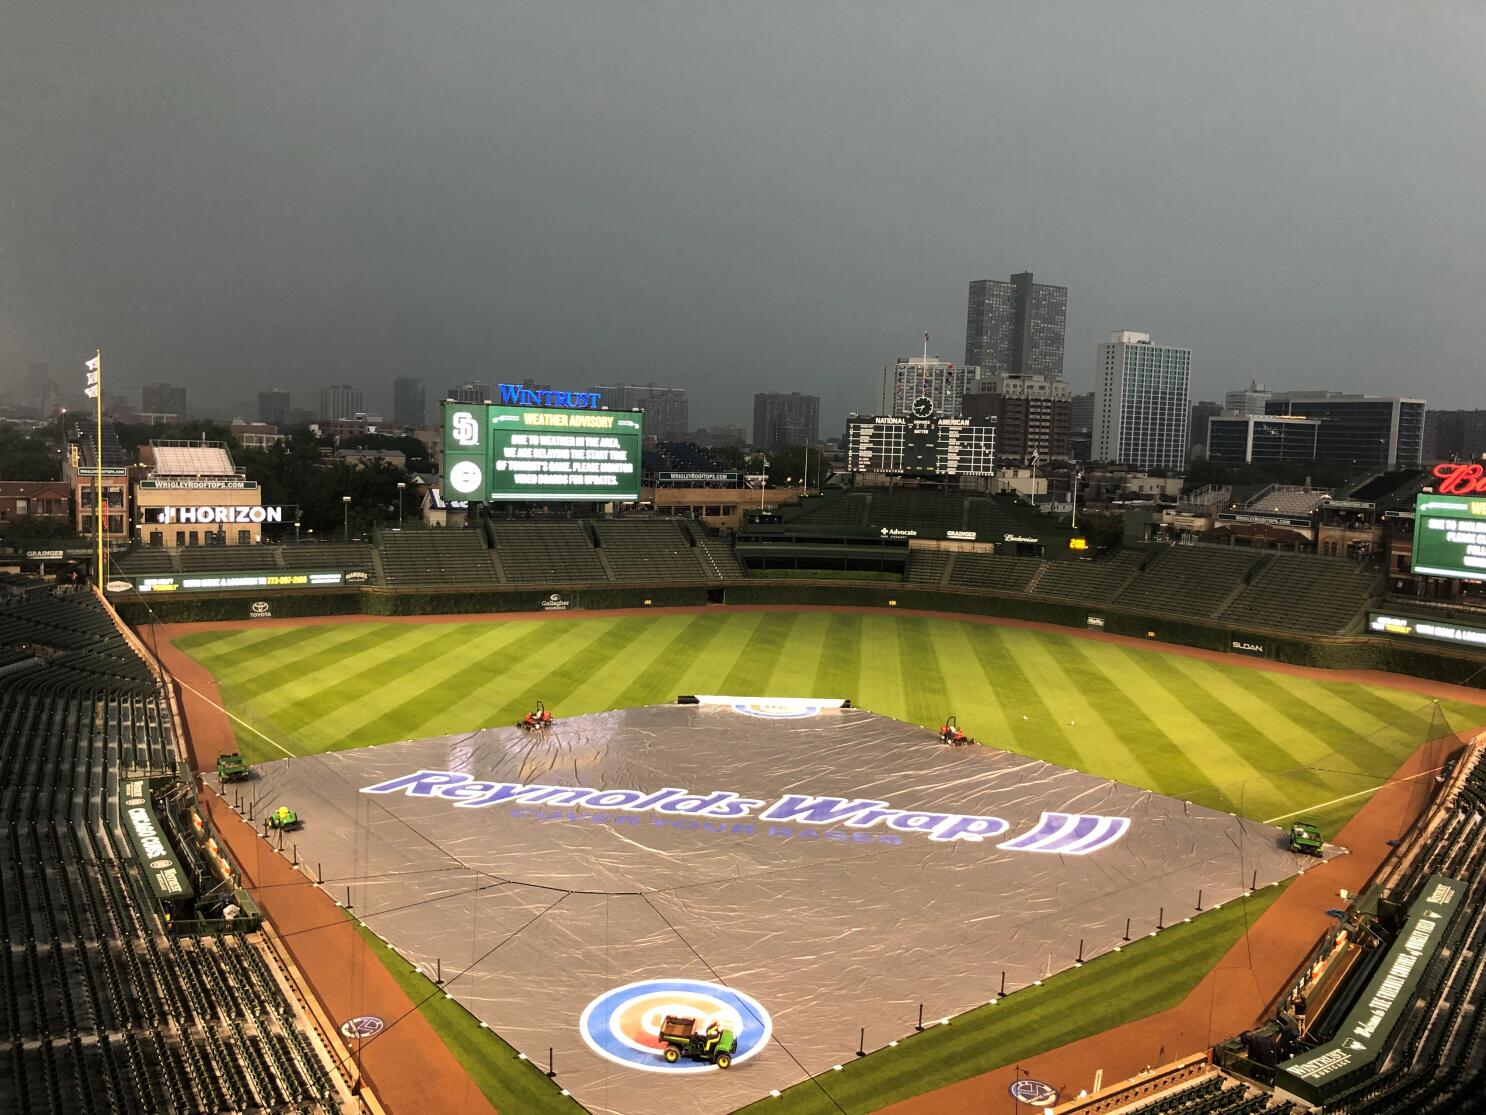 Play Round of Golf Inside Wrigley Field in Chicago July 6 to 9